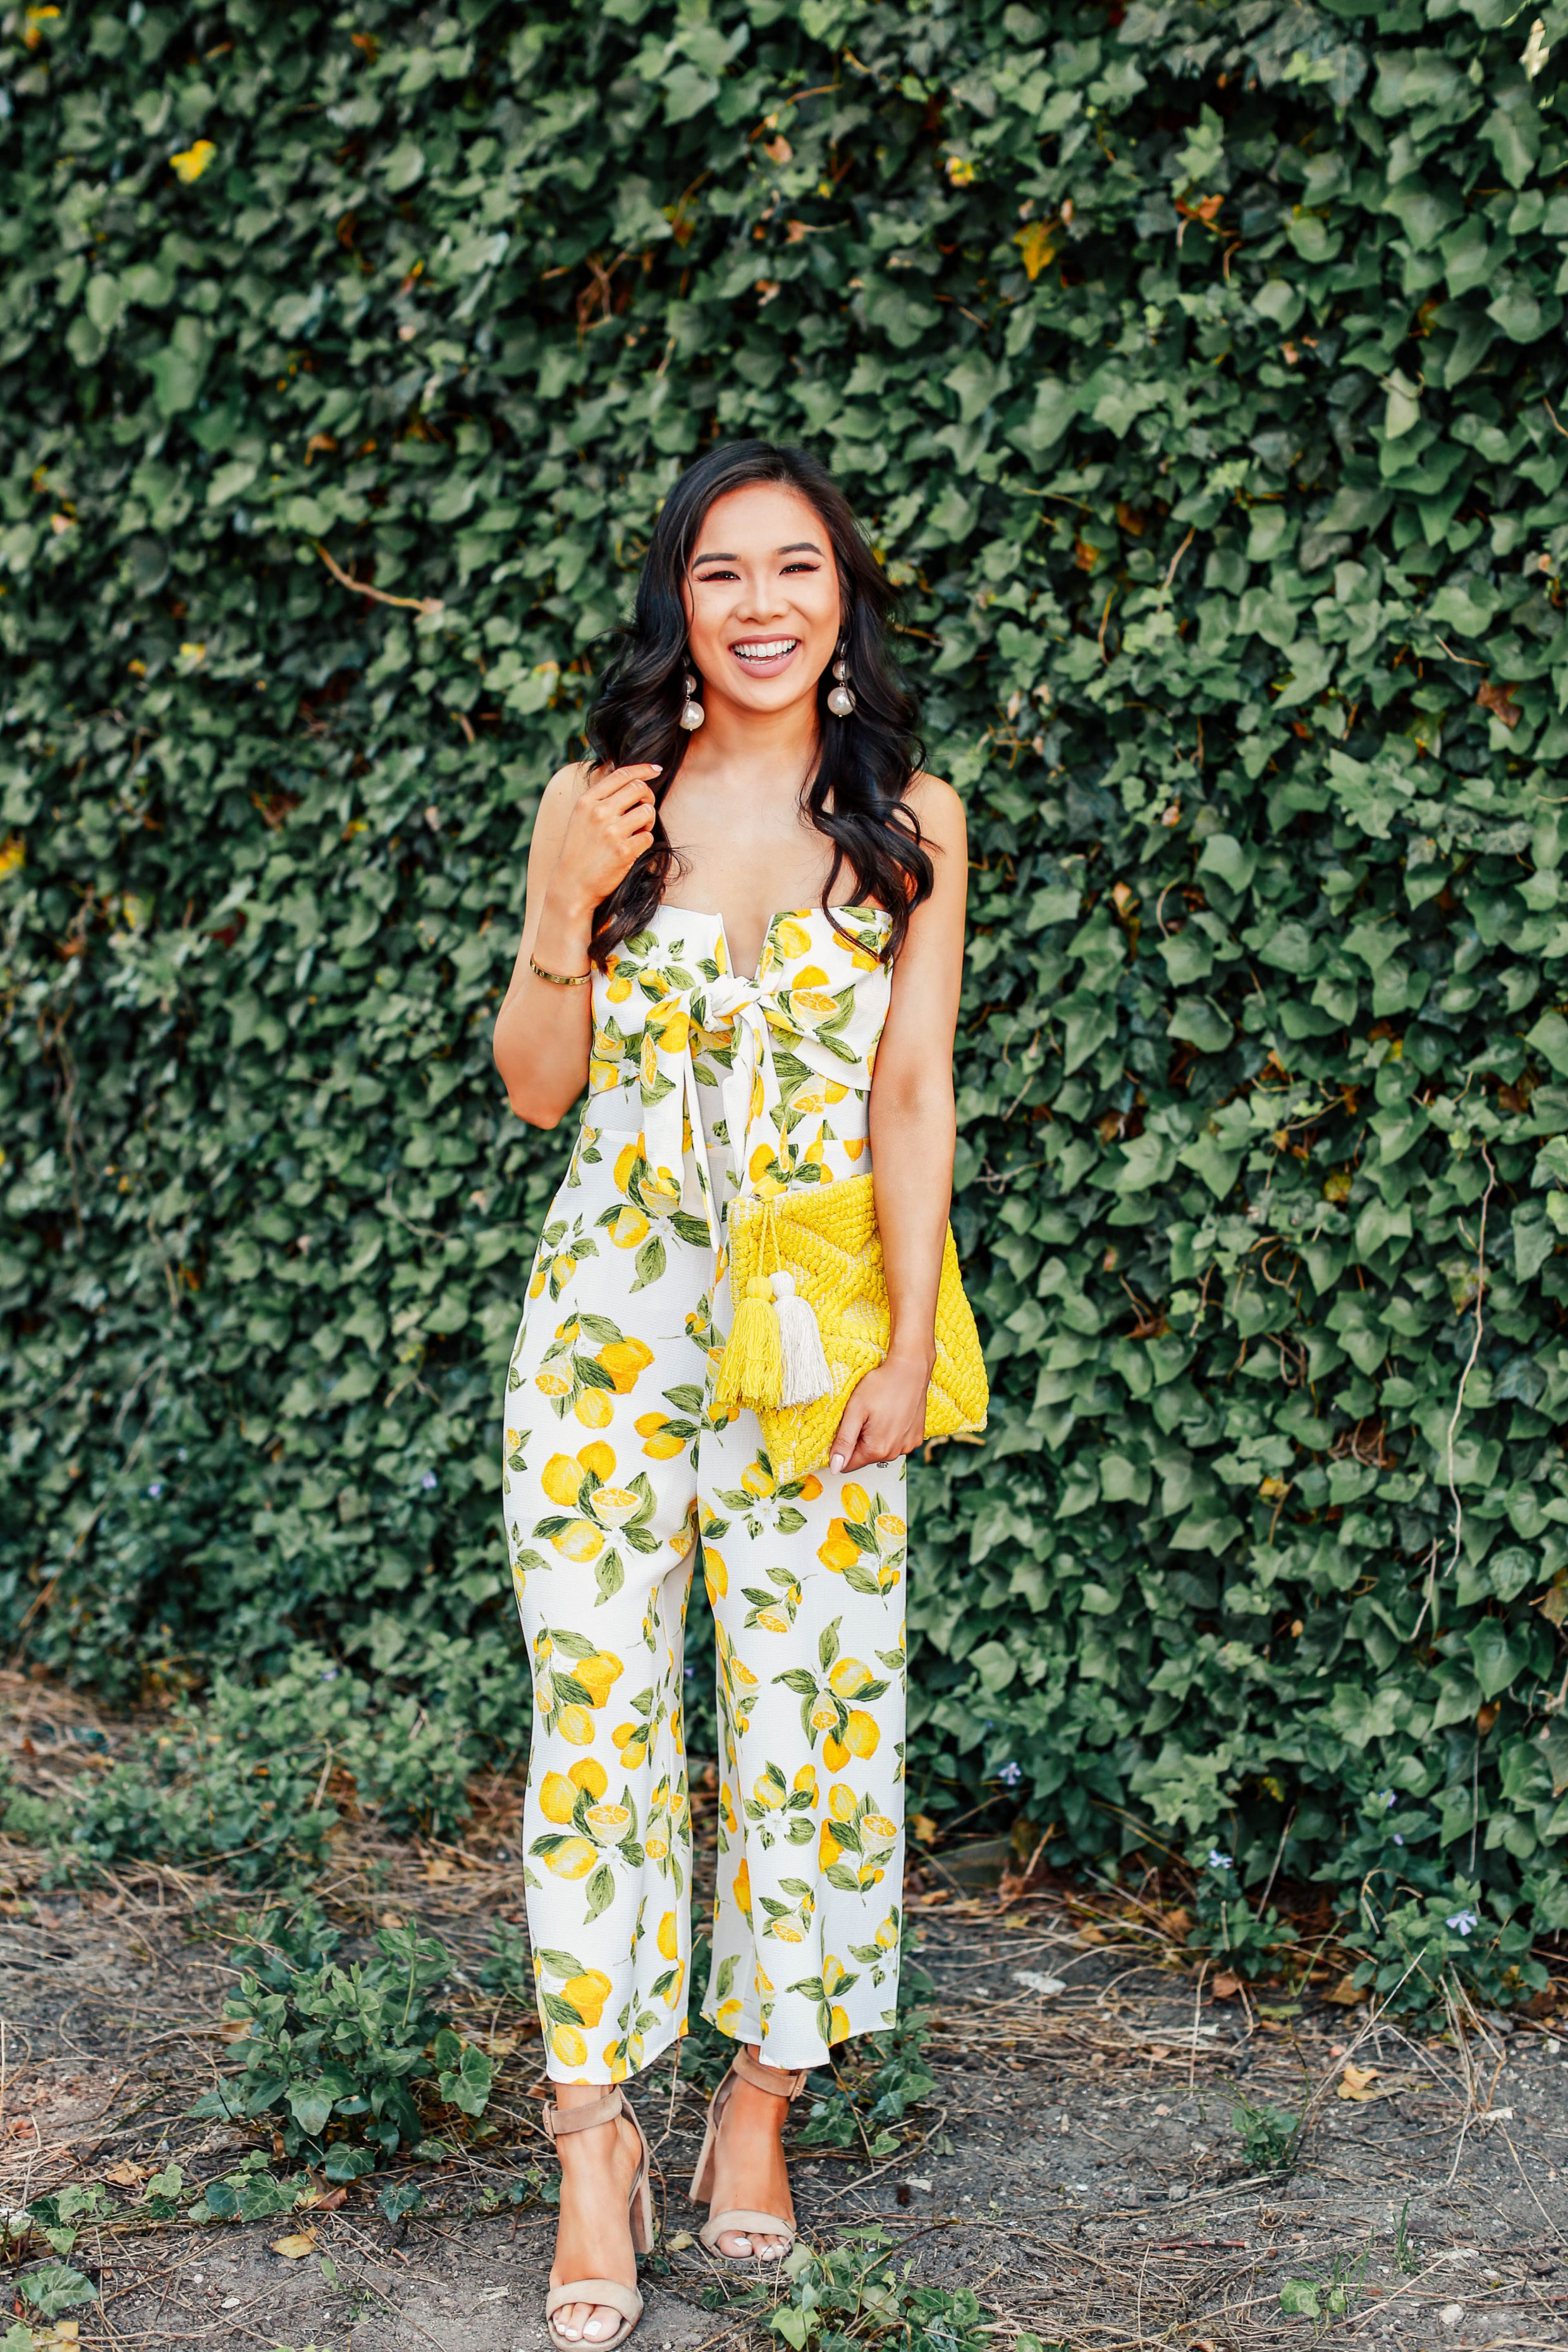 Hoang-Kim wears a strapless lemon print jumpsuit with a yellow Palisades clutch